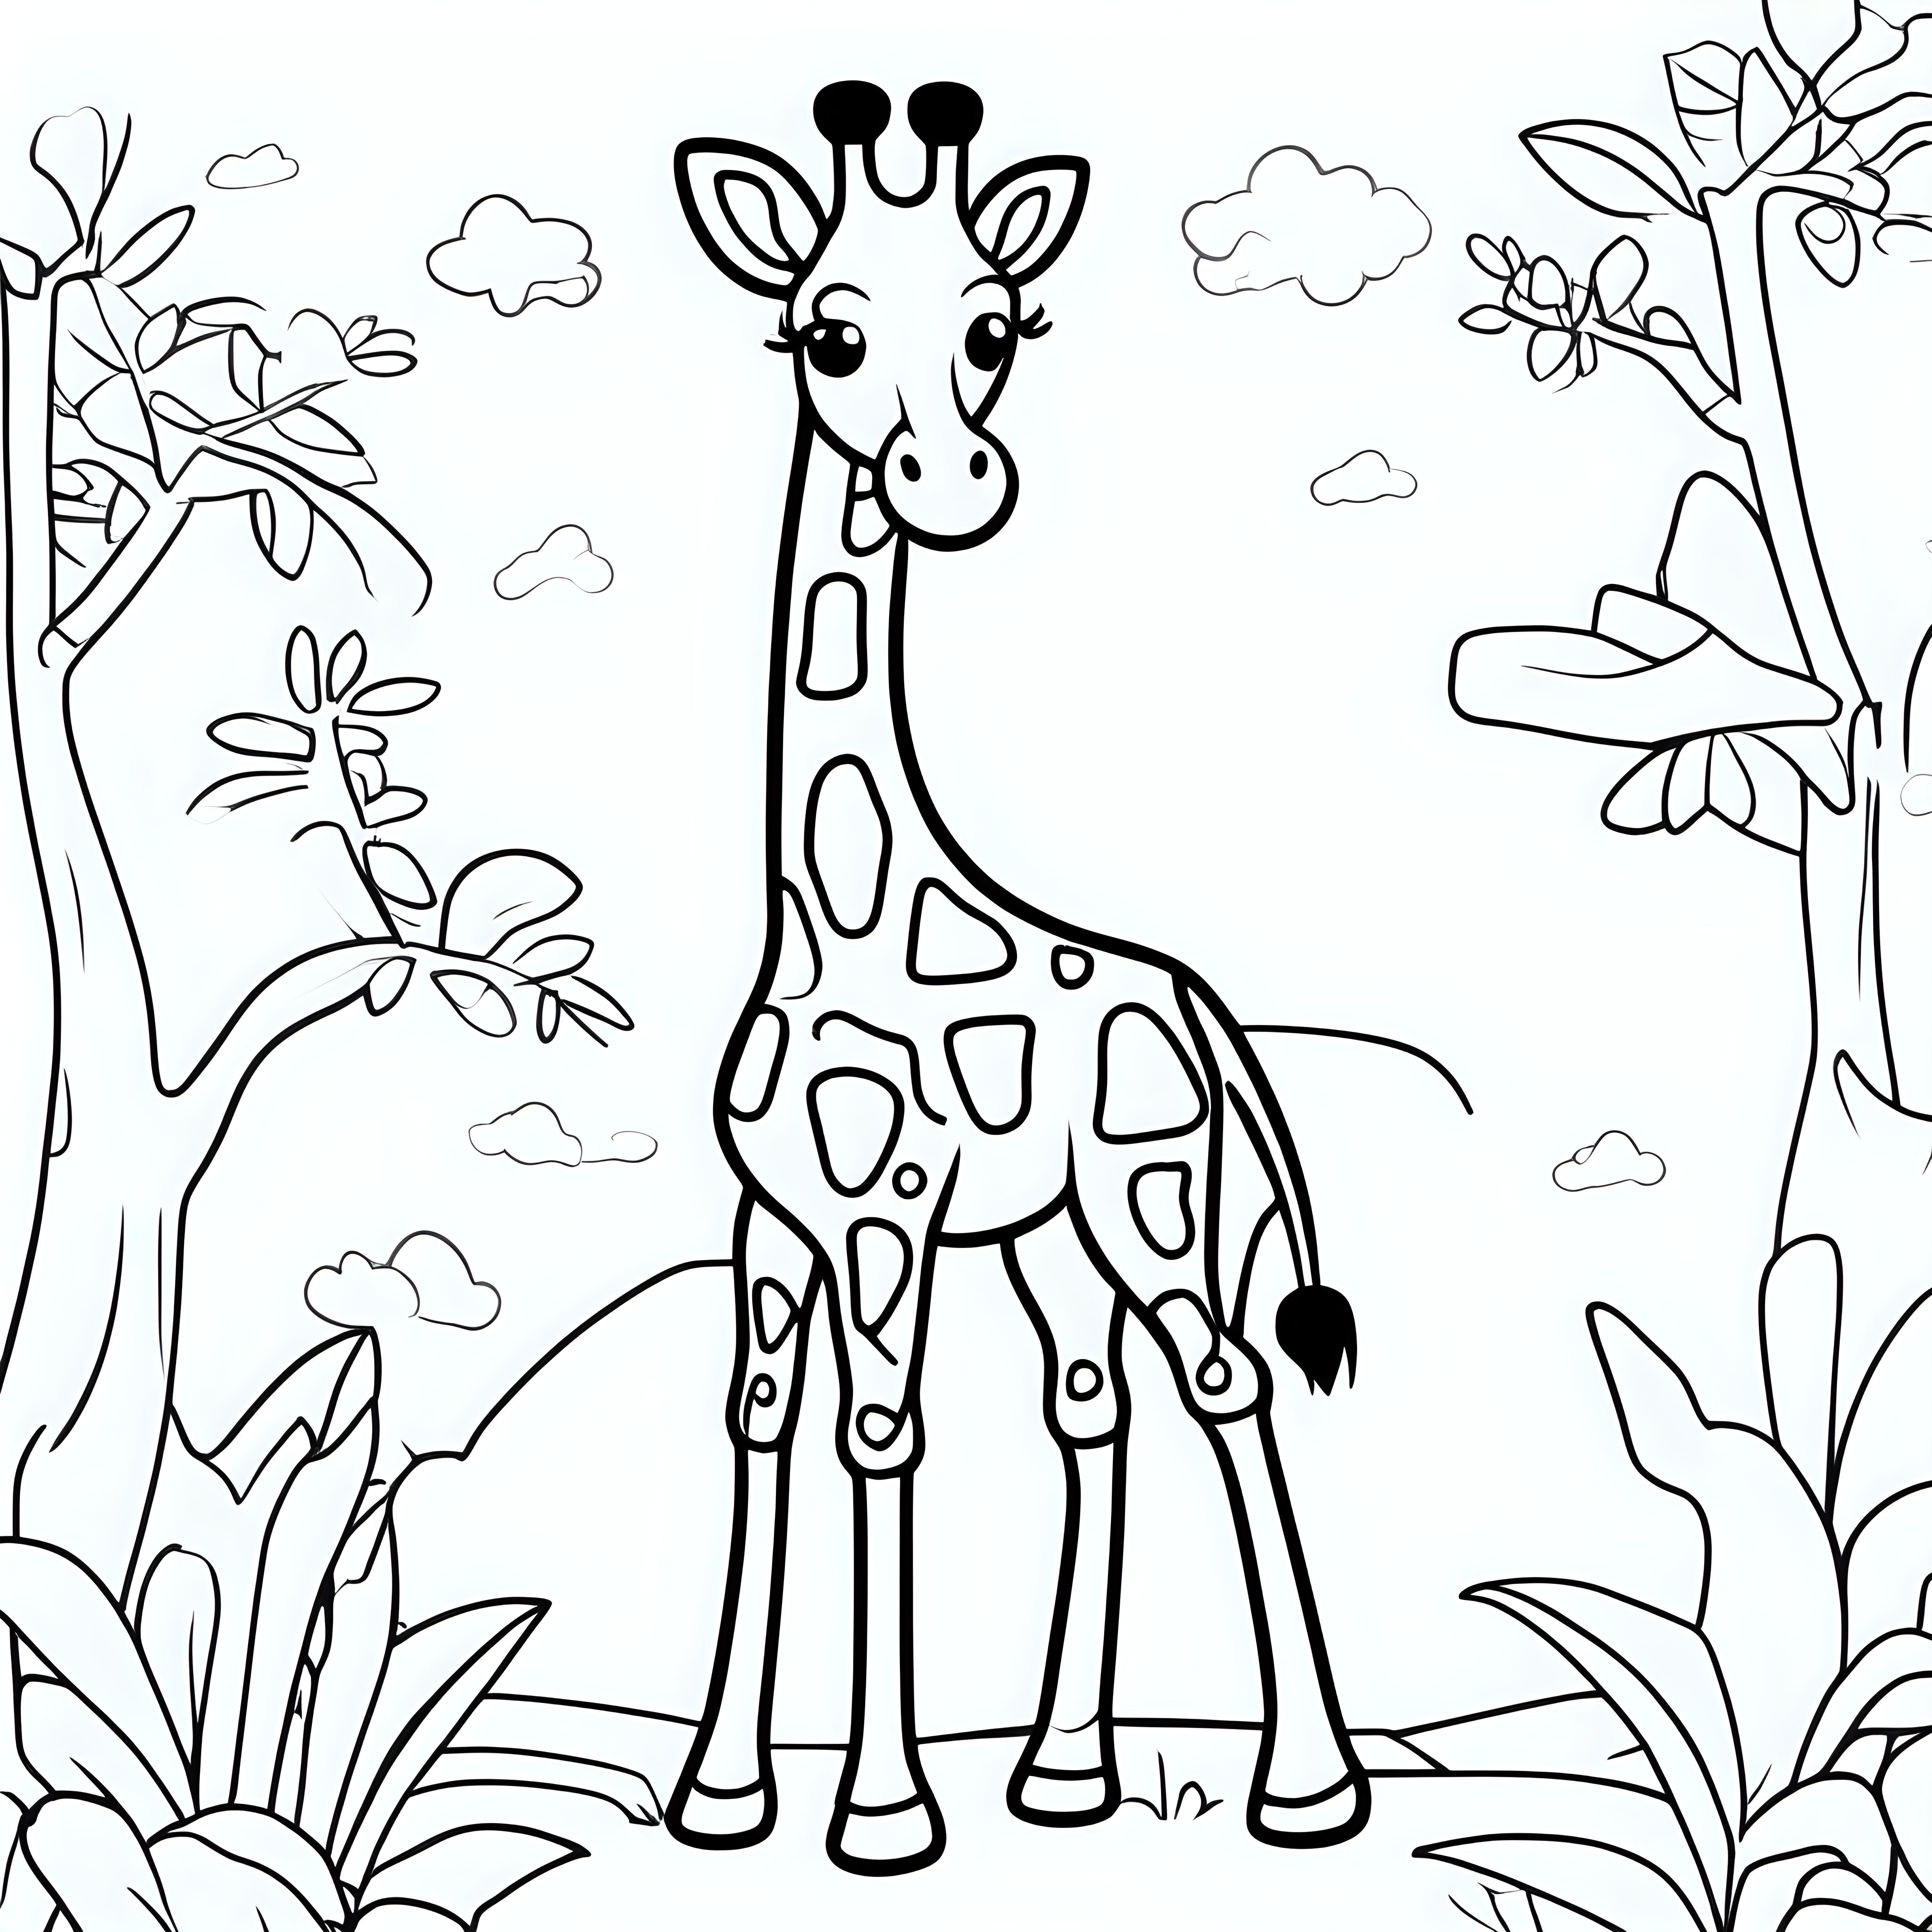 draw a cute Giraffe with only the outline